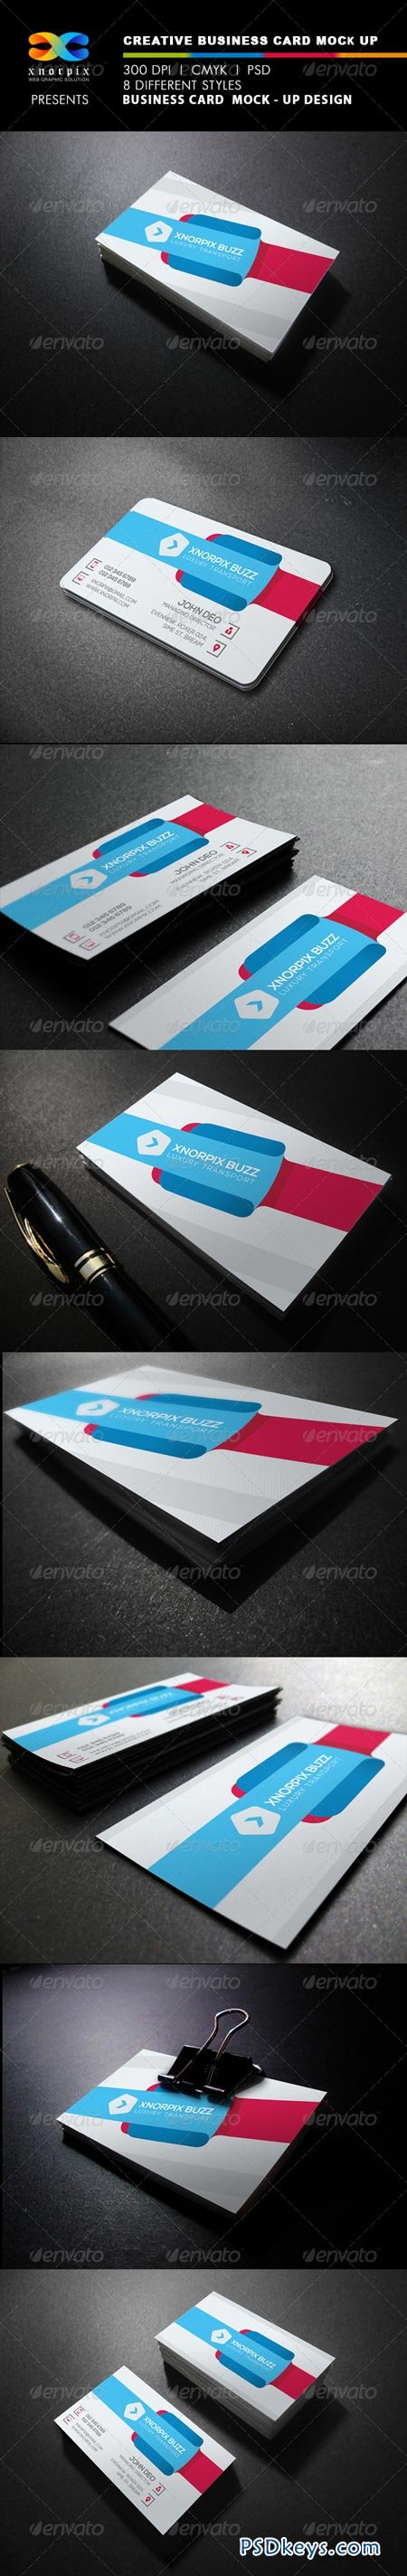 Realistic Business Card Mock up 7824989